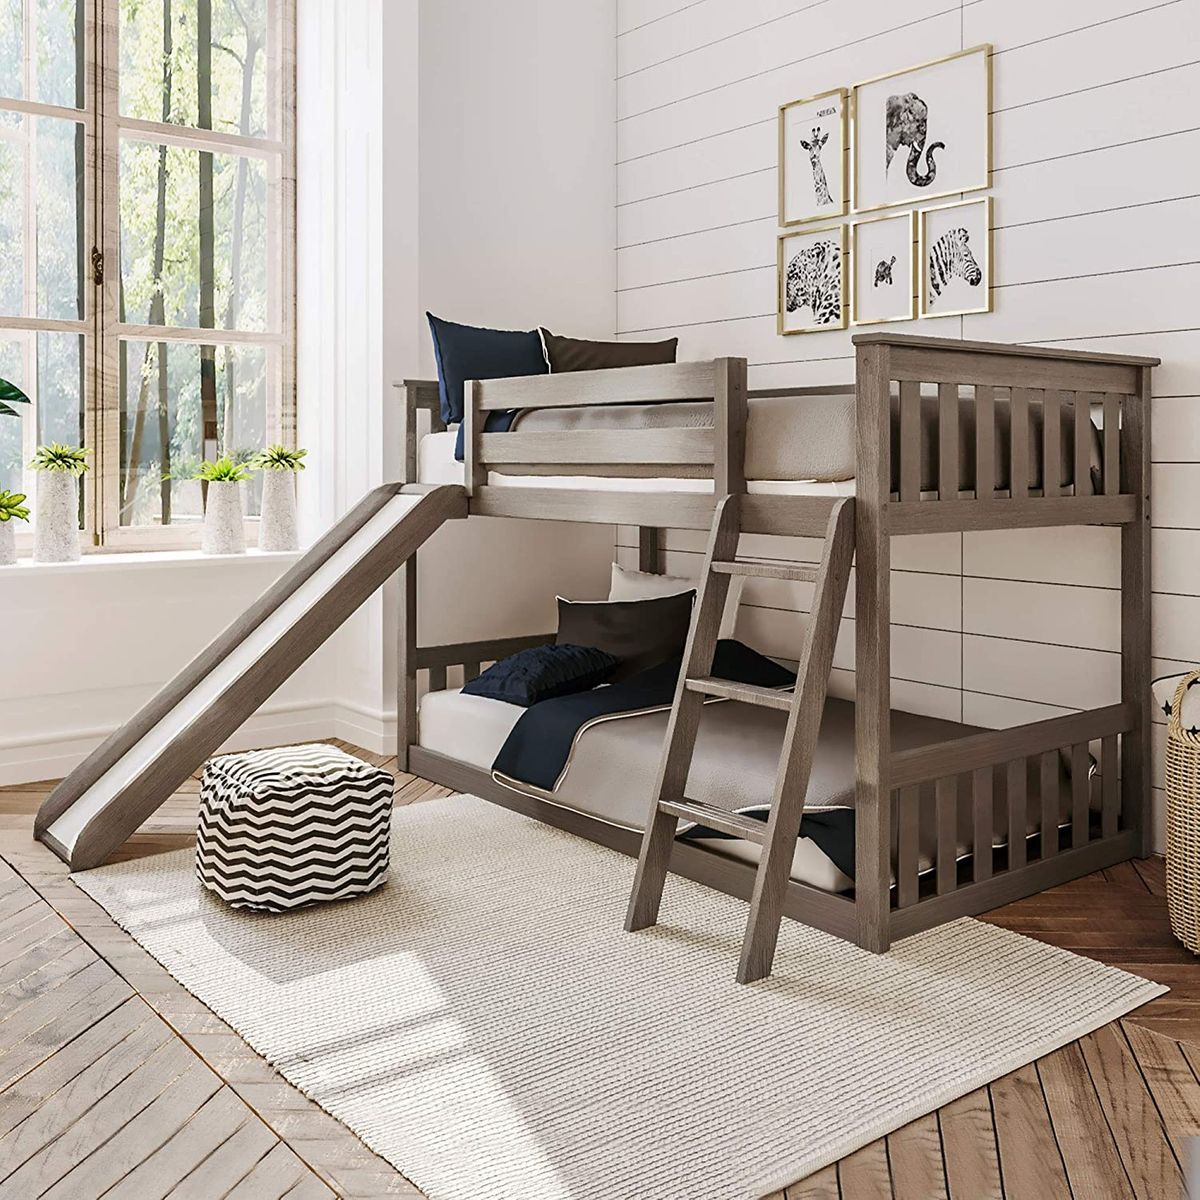 8 Best Bunk Beds 2020 The Strategist, Bunk Beds With Slide For Kids